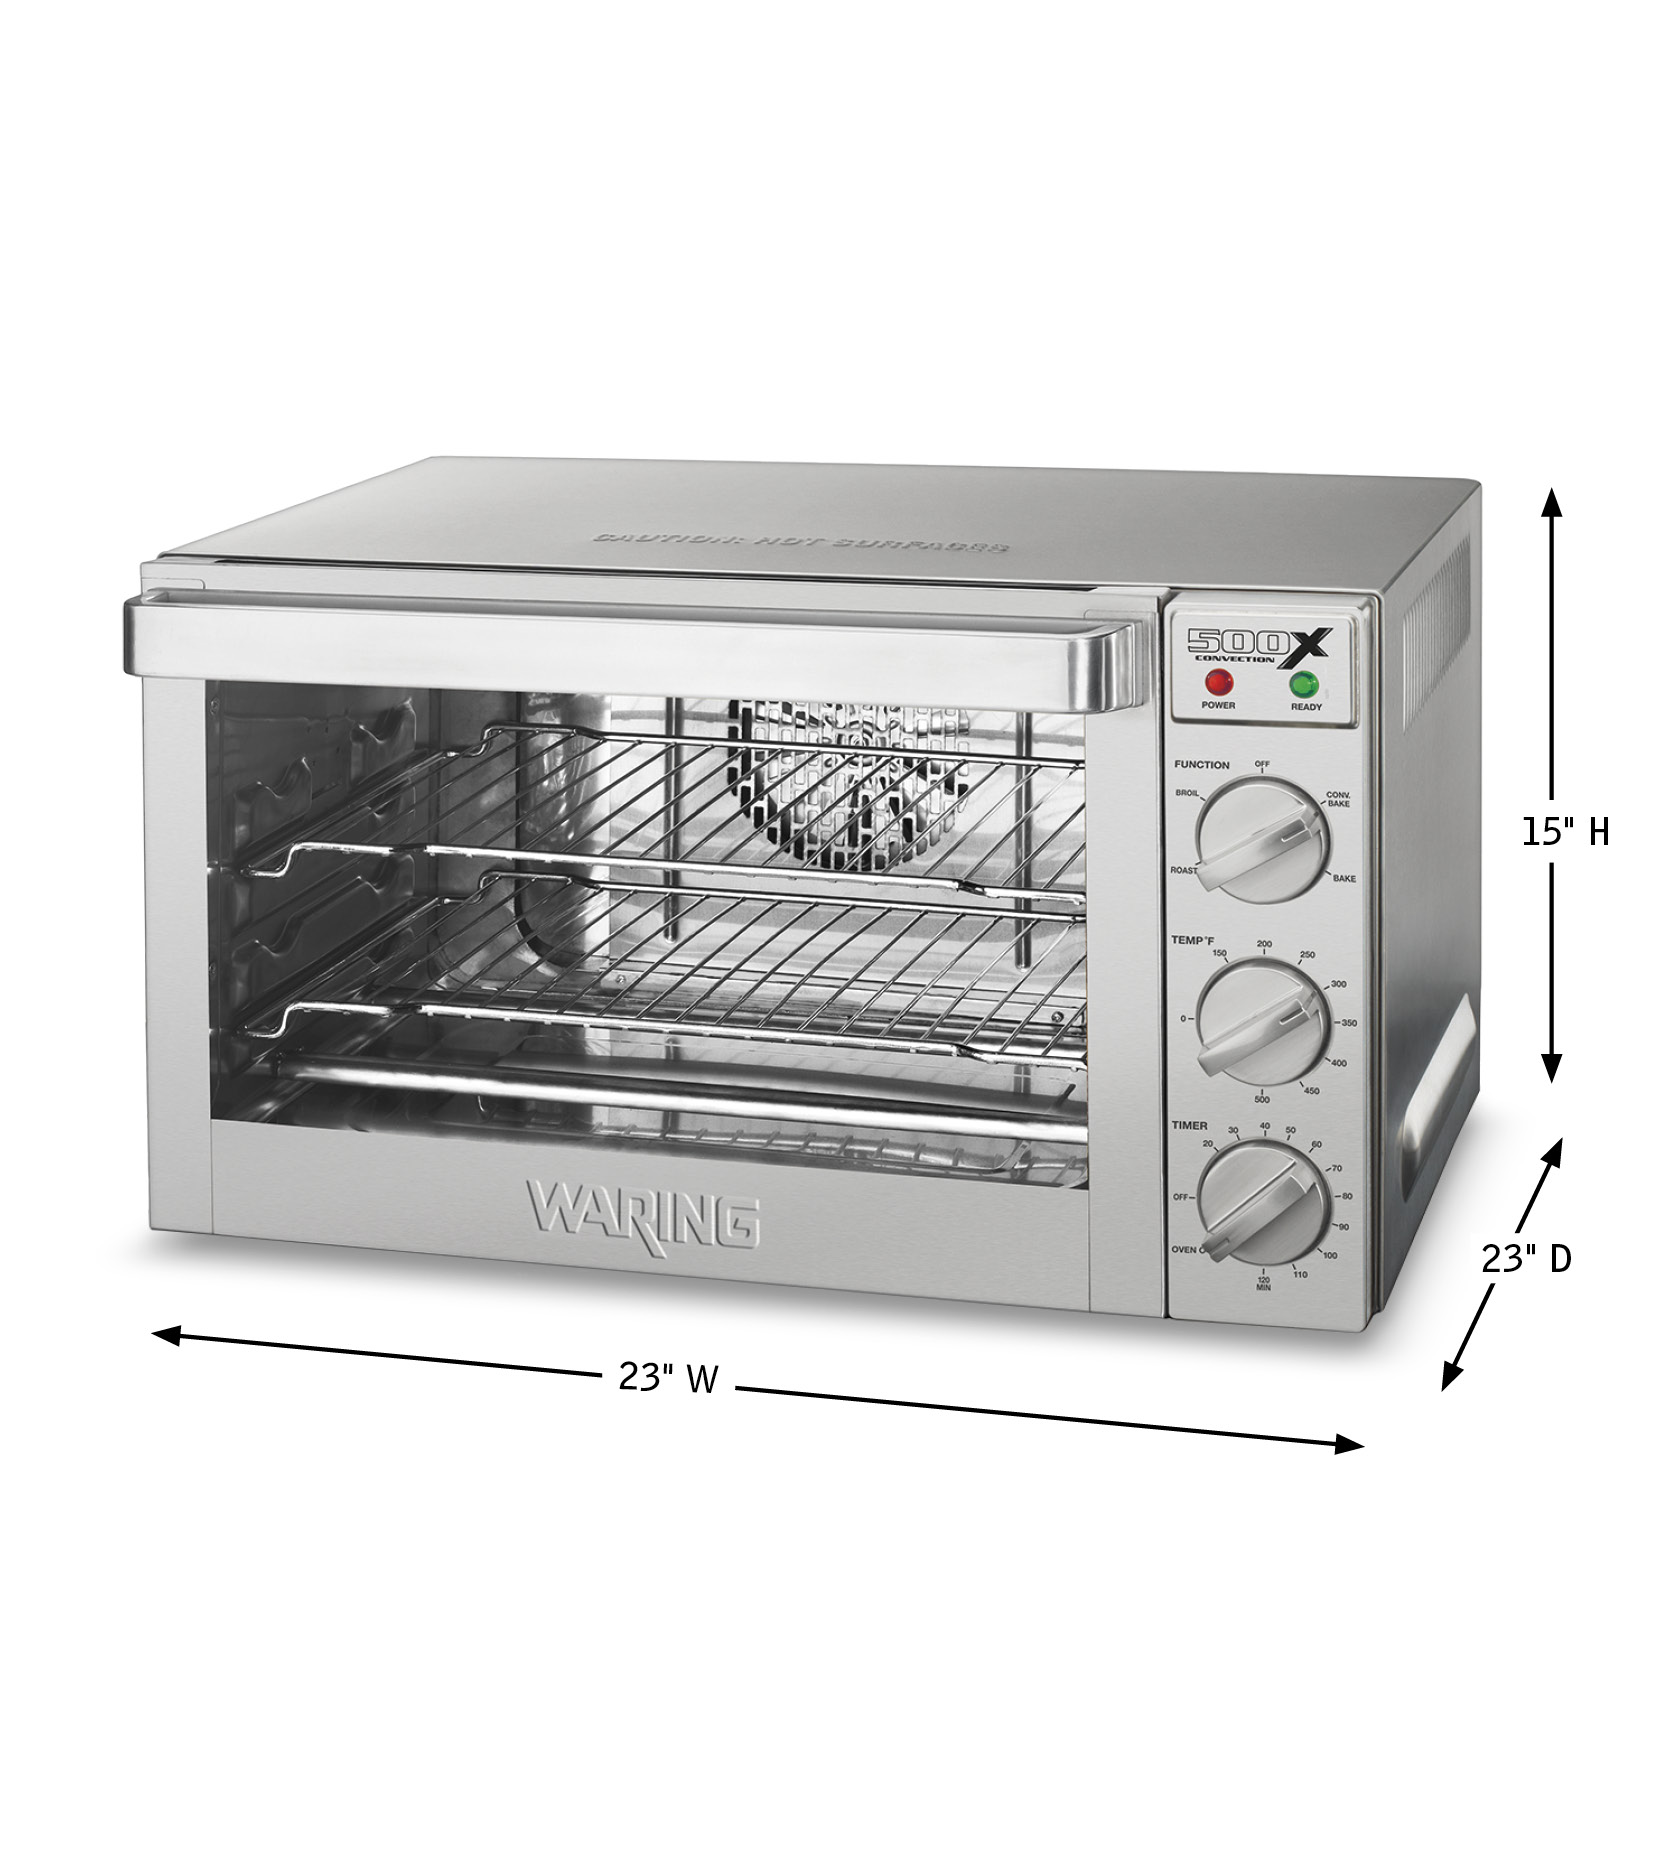 https://www.waringcommercialproducts.com/files/products/wco500x-waring-convection-ovens-spec.jpg